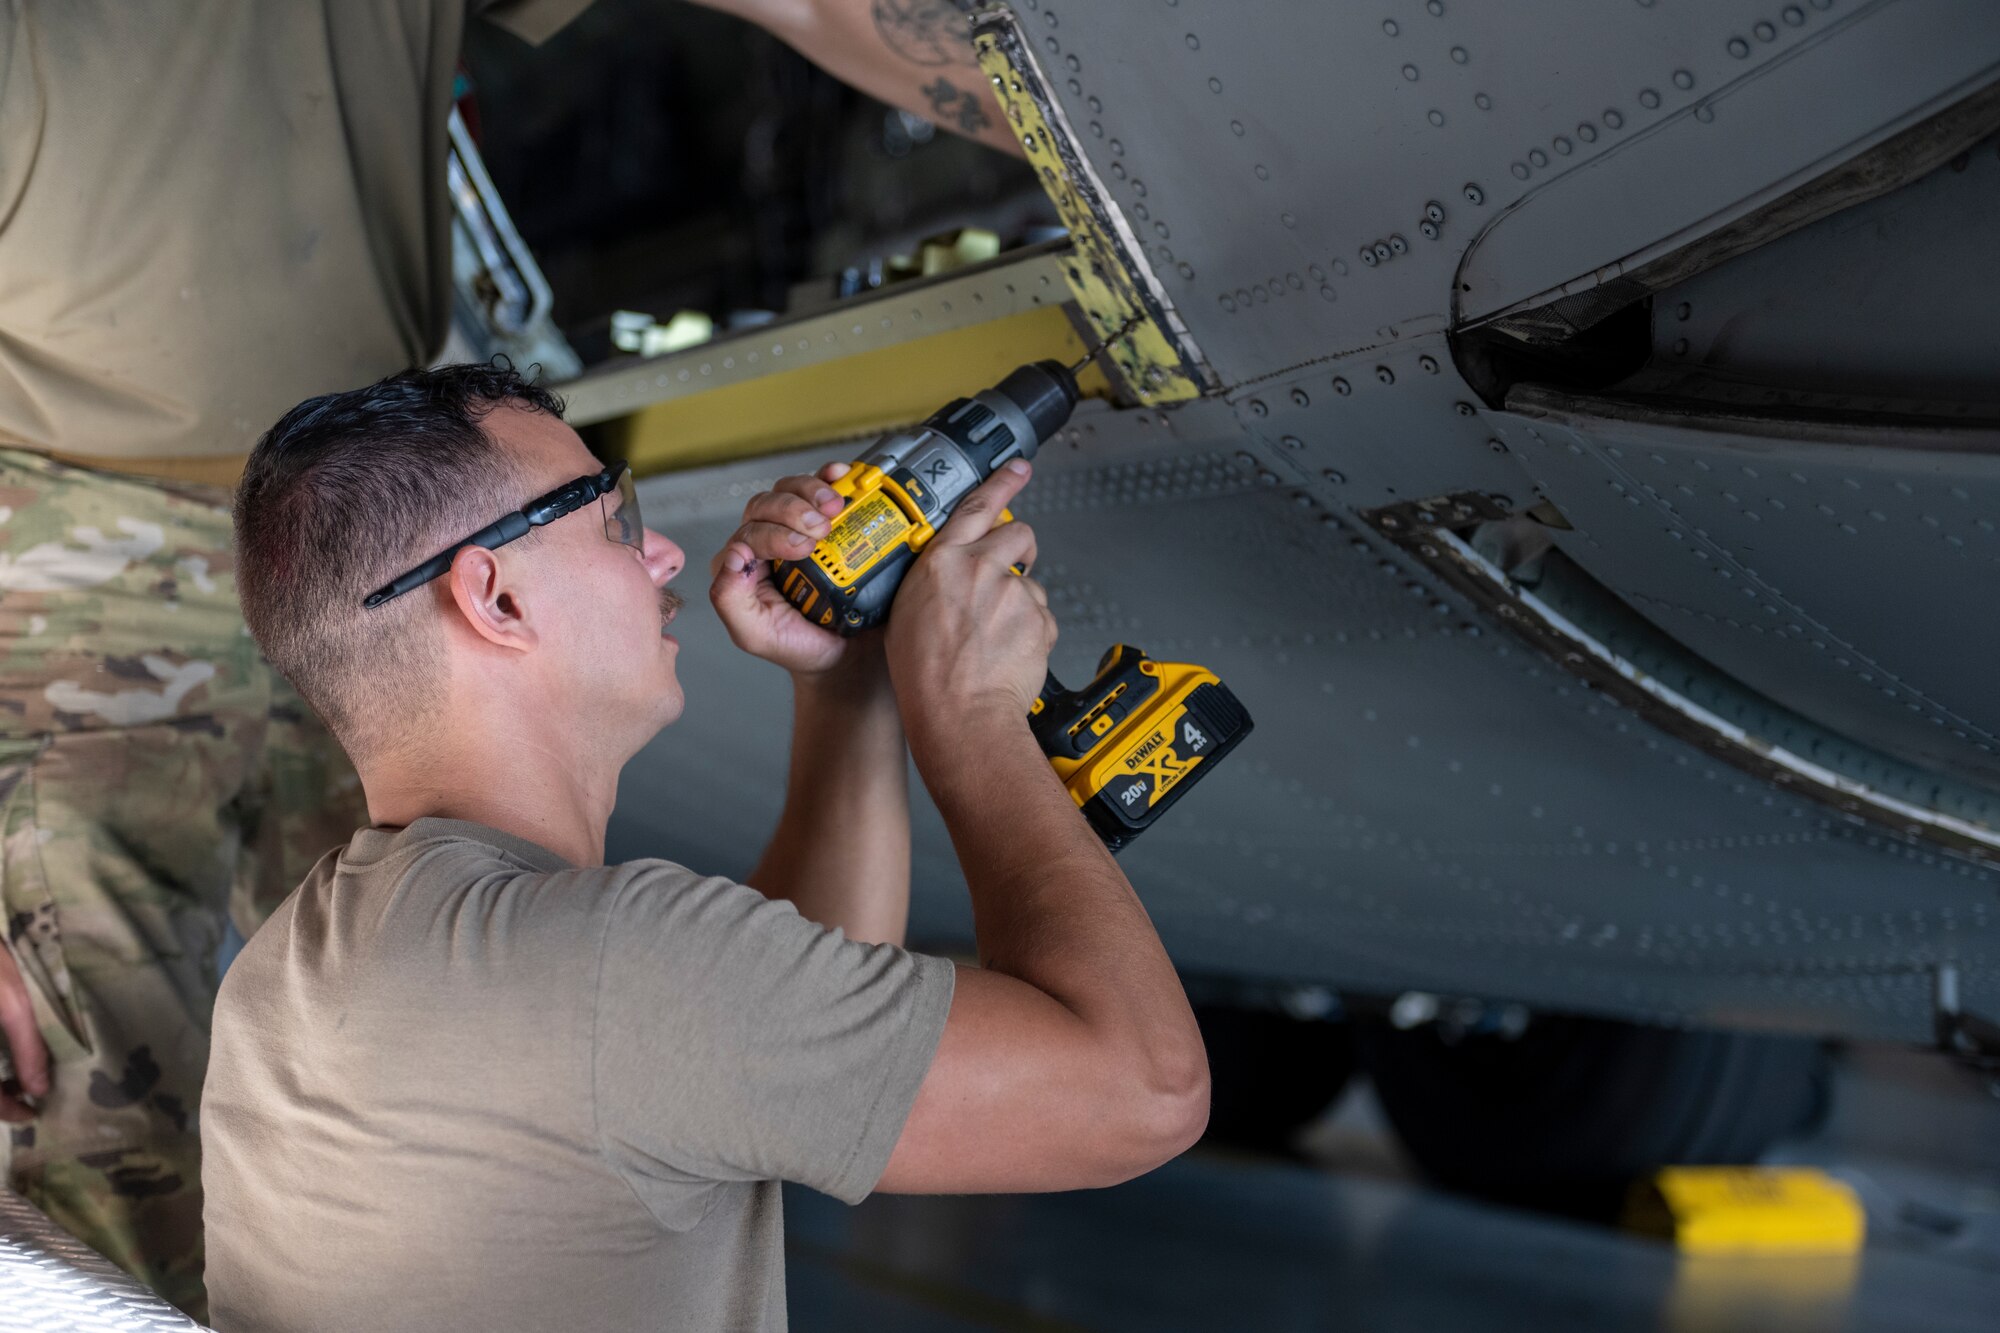 A man holding an electric drill, wearing safety glasses, drilling into the side of an aircraft.